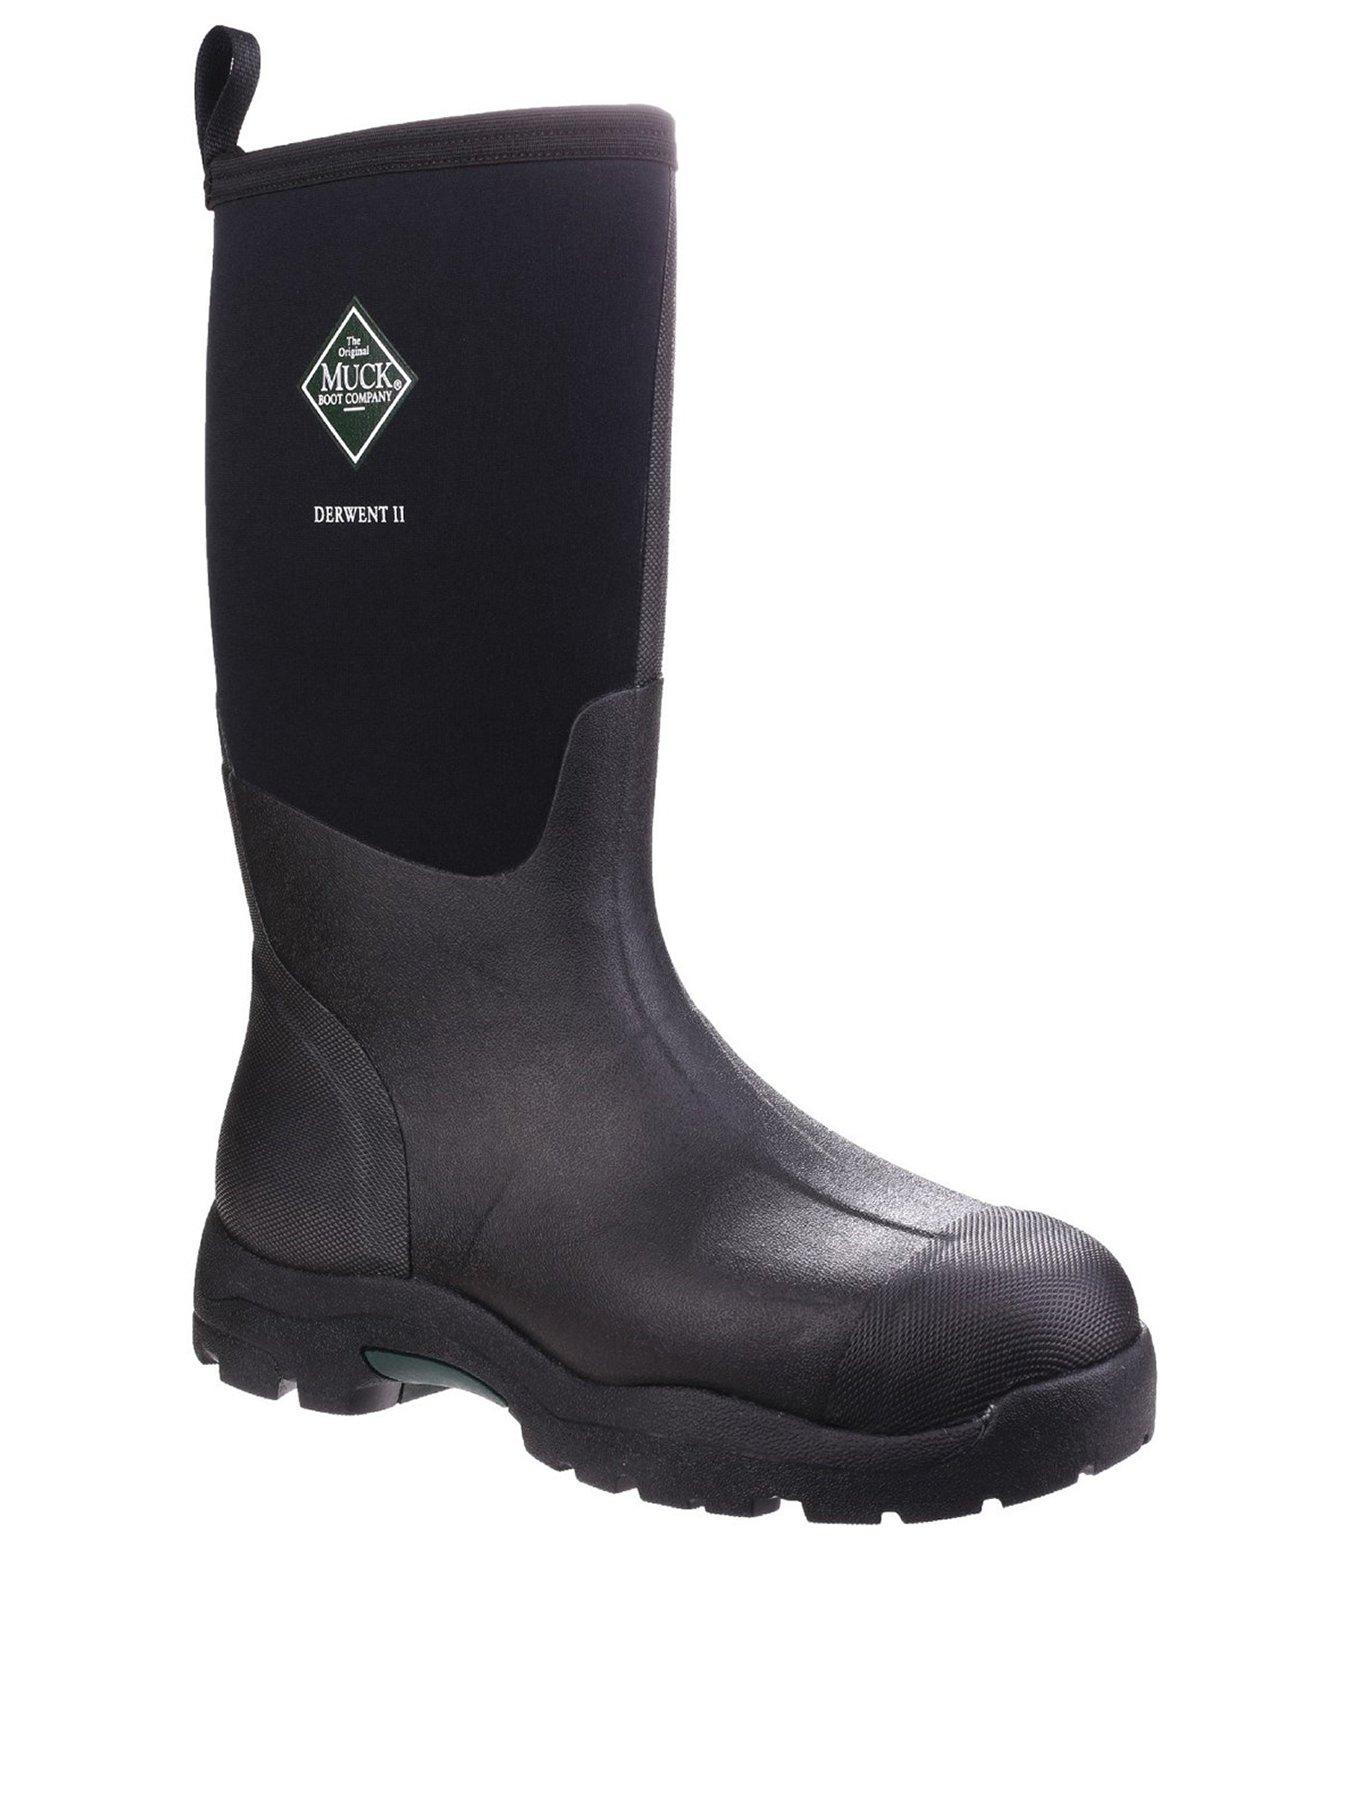 Muck boots | Brand store | www.very.co.uk